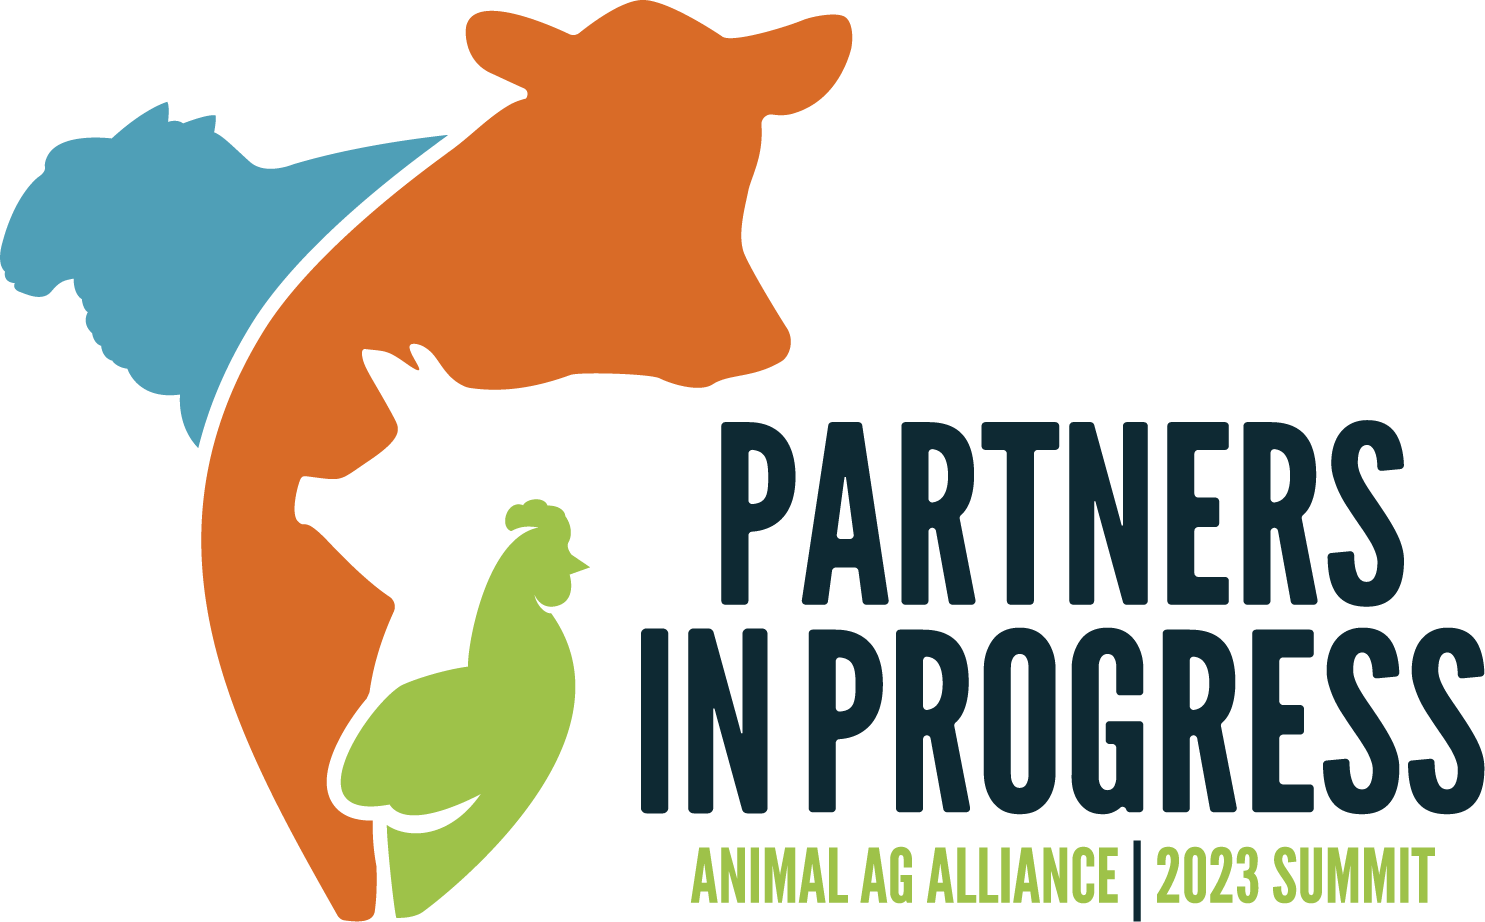 Registration now open for Animal Agricultural Alliance 2023 summit